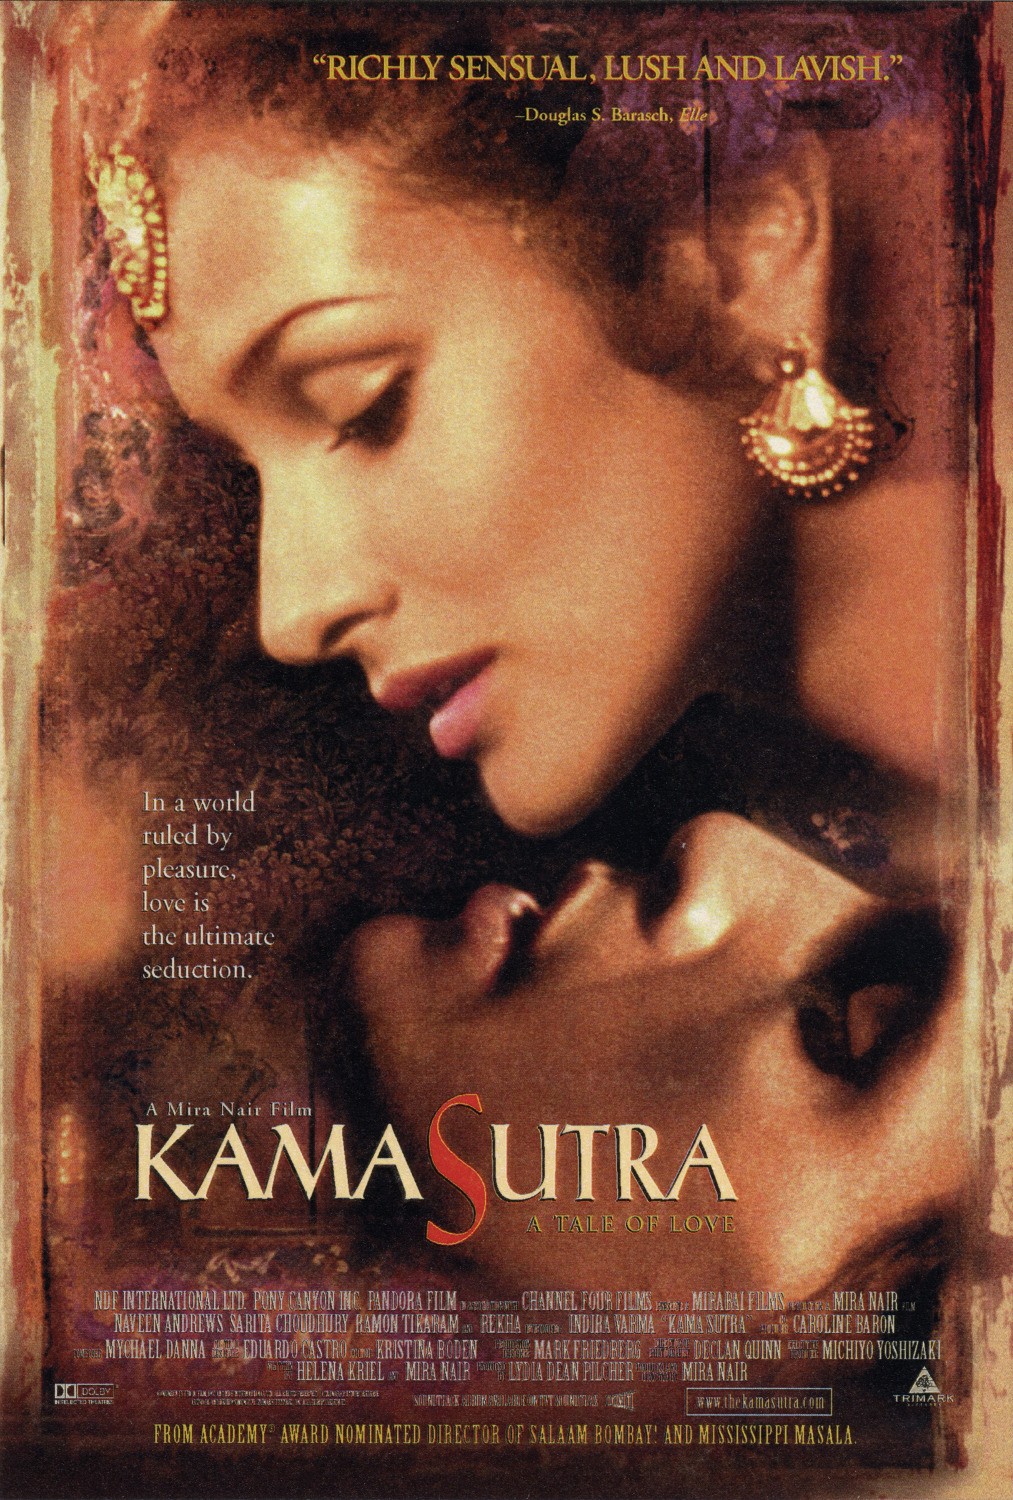 Kama Sutra A Tale Of Love 2 Of 2 Extra Large Movie Poster Image